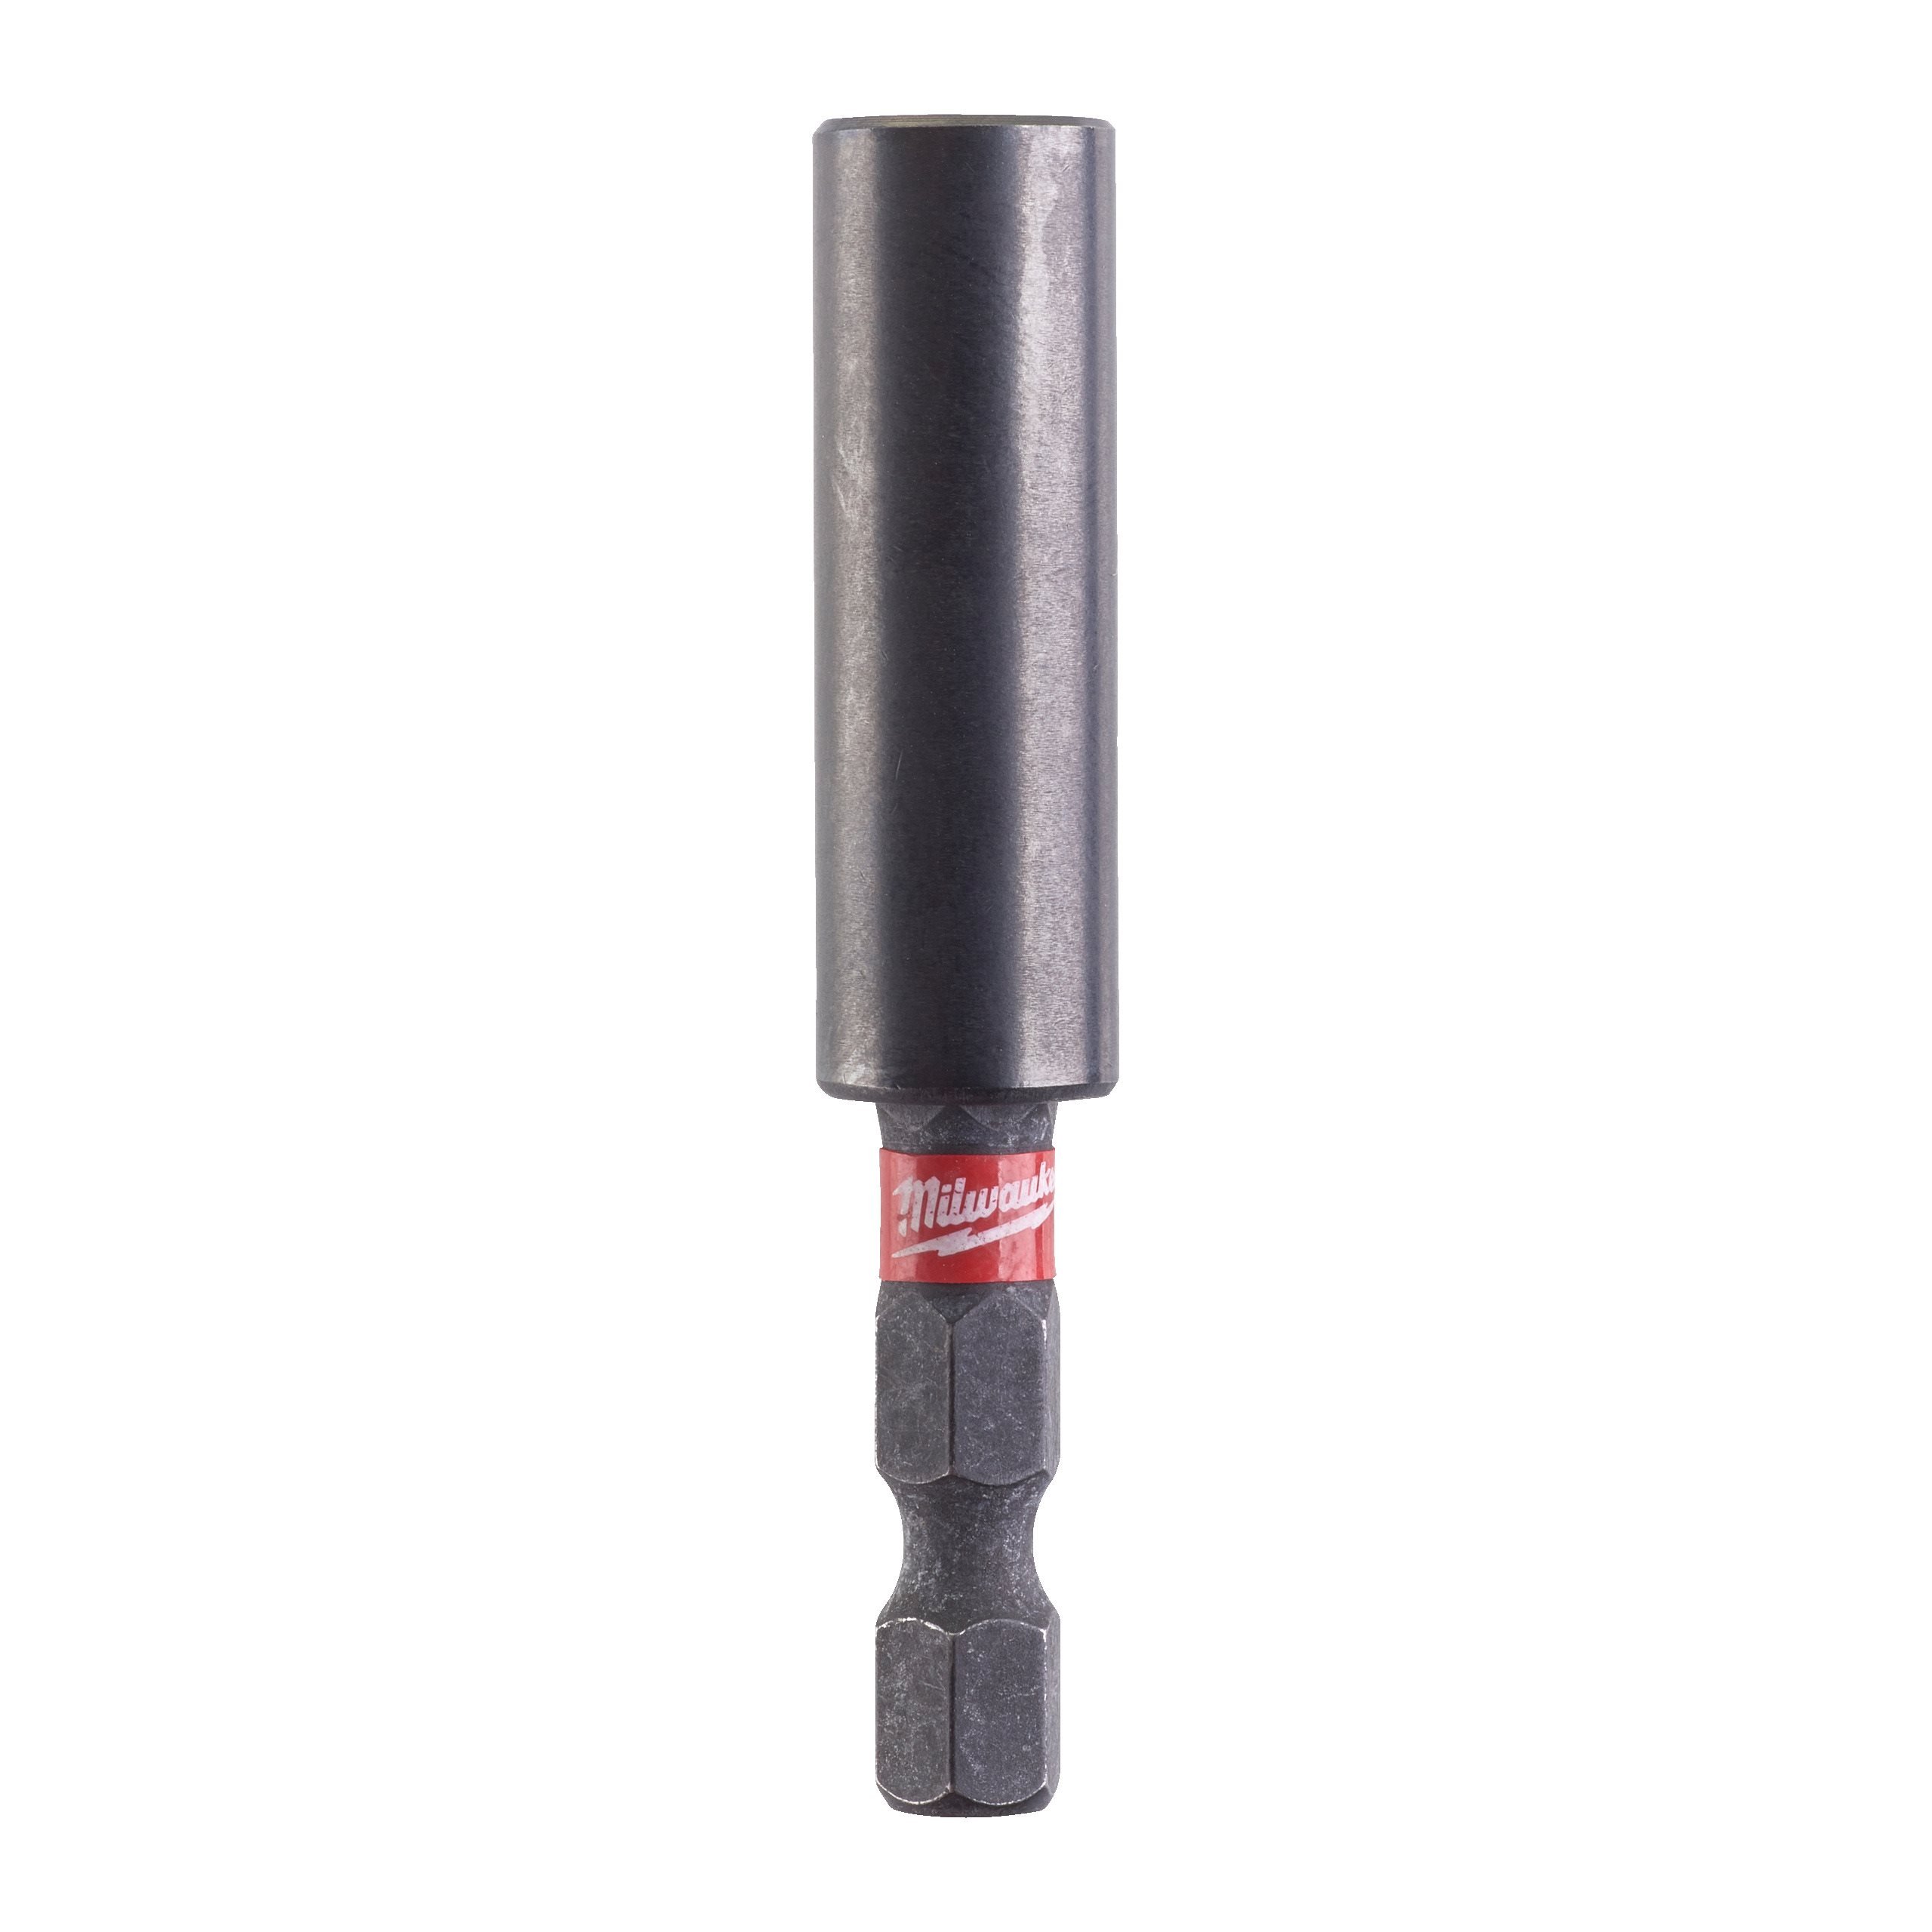 10 Milwaukee 60mm Impact Driver Rated Magnetic Screwdriver Bit Holder,4932430478 